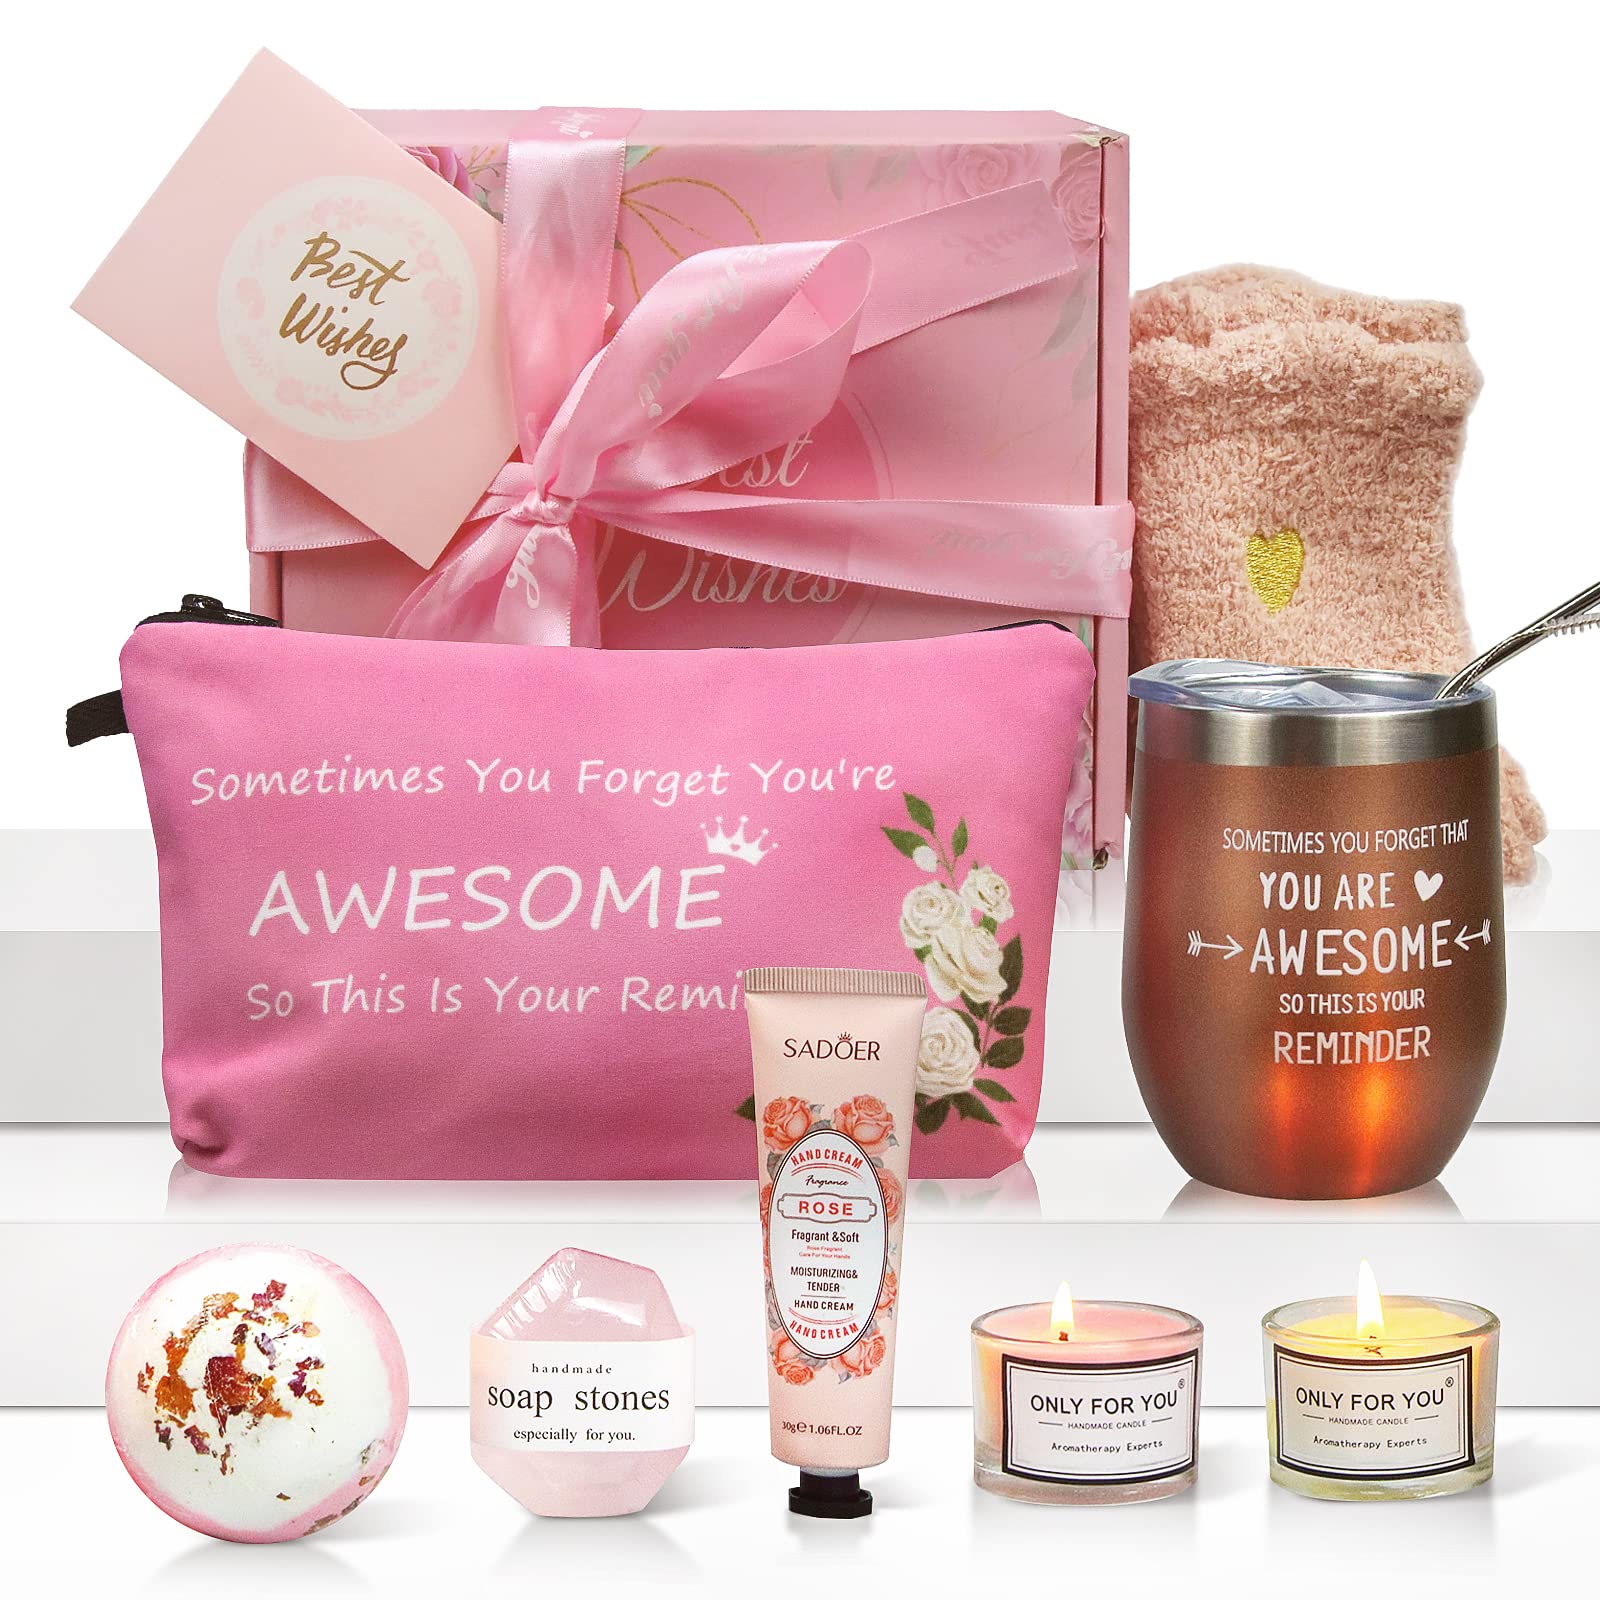 Birthday Gifts for Women, Unique Happy Birthday Relaxing Spa Bath Set Gift  Baskets Ideas for Her, Mom, Sister, Friends, Best Pampering Care Gift Box  Thank You Gifts for Women Who Have Everything